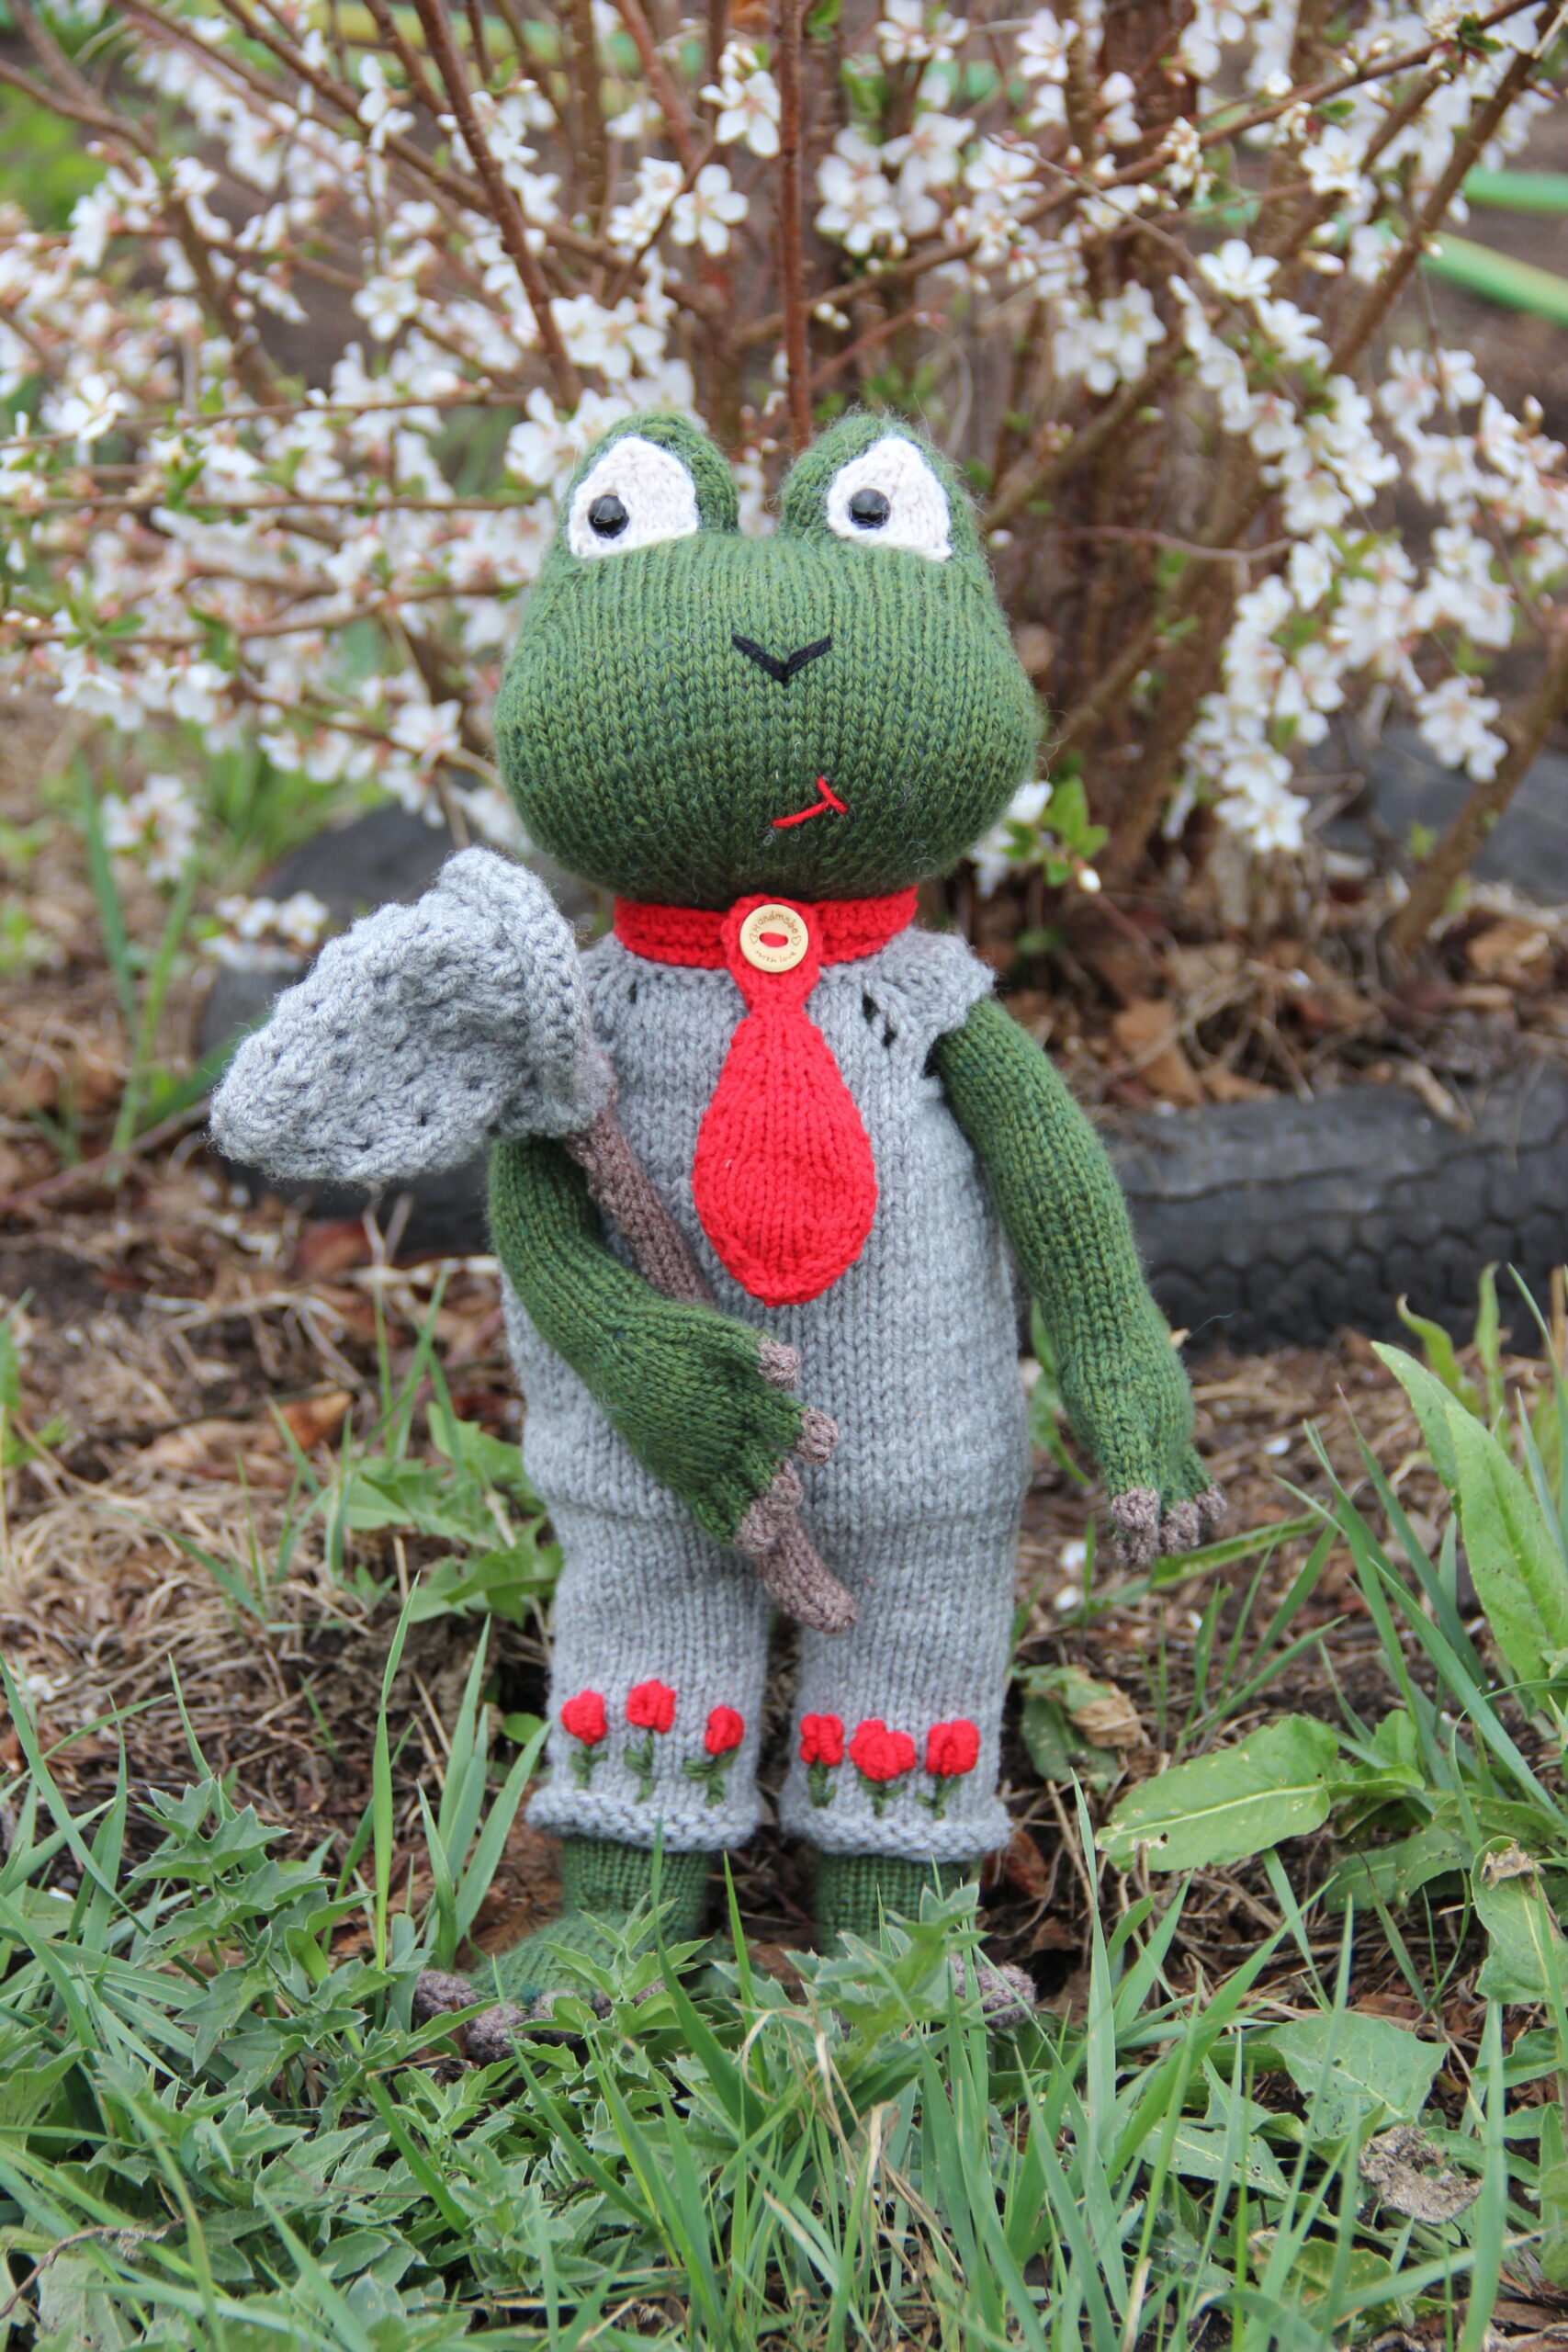 Knitting pattern for a cute frog toy, knitted plush frog, art frog doll  Knitting pattern by MamaKlaraToys